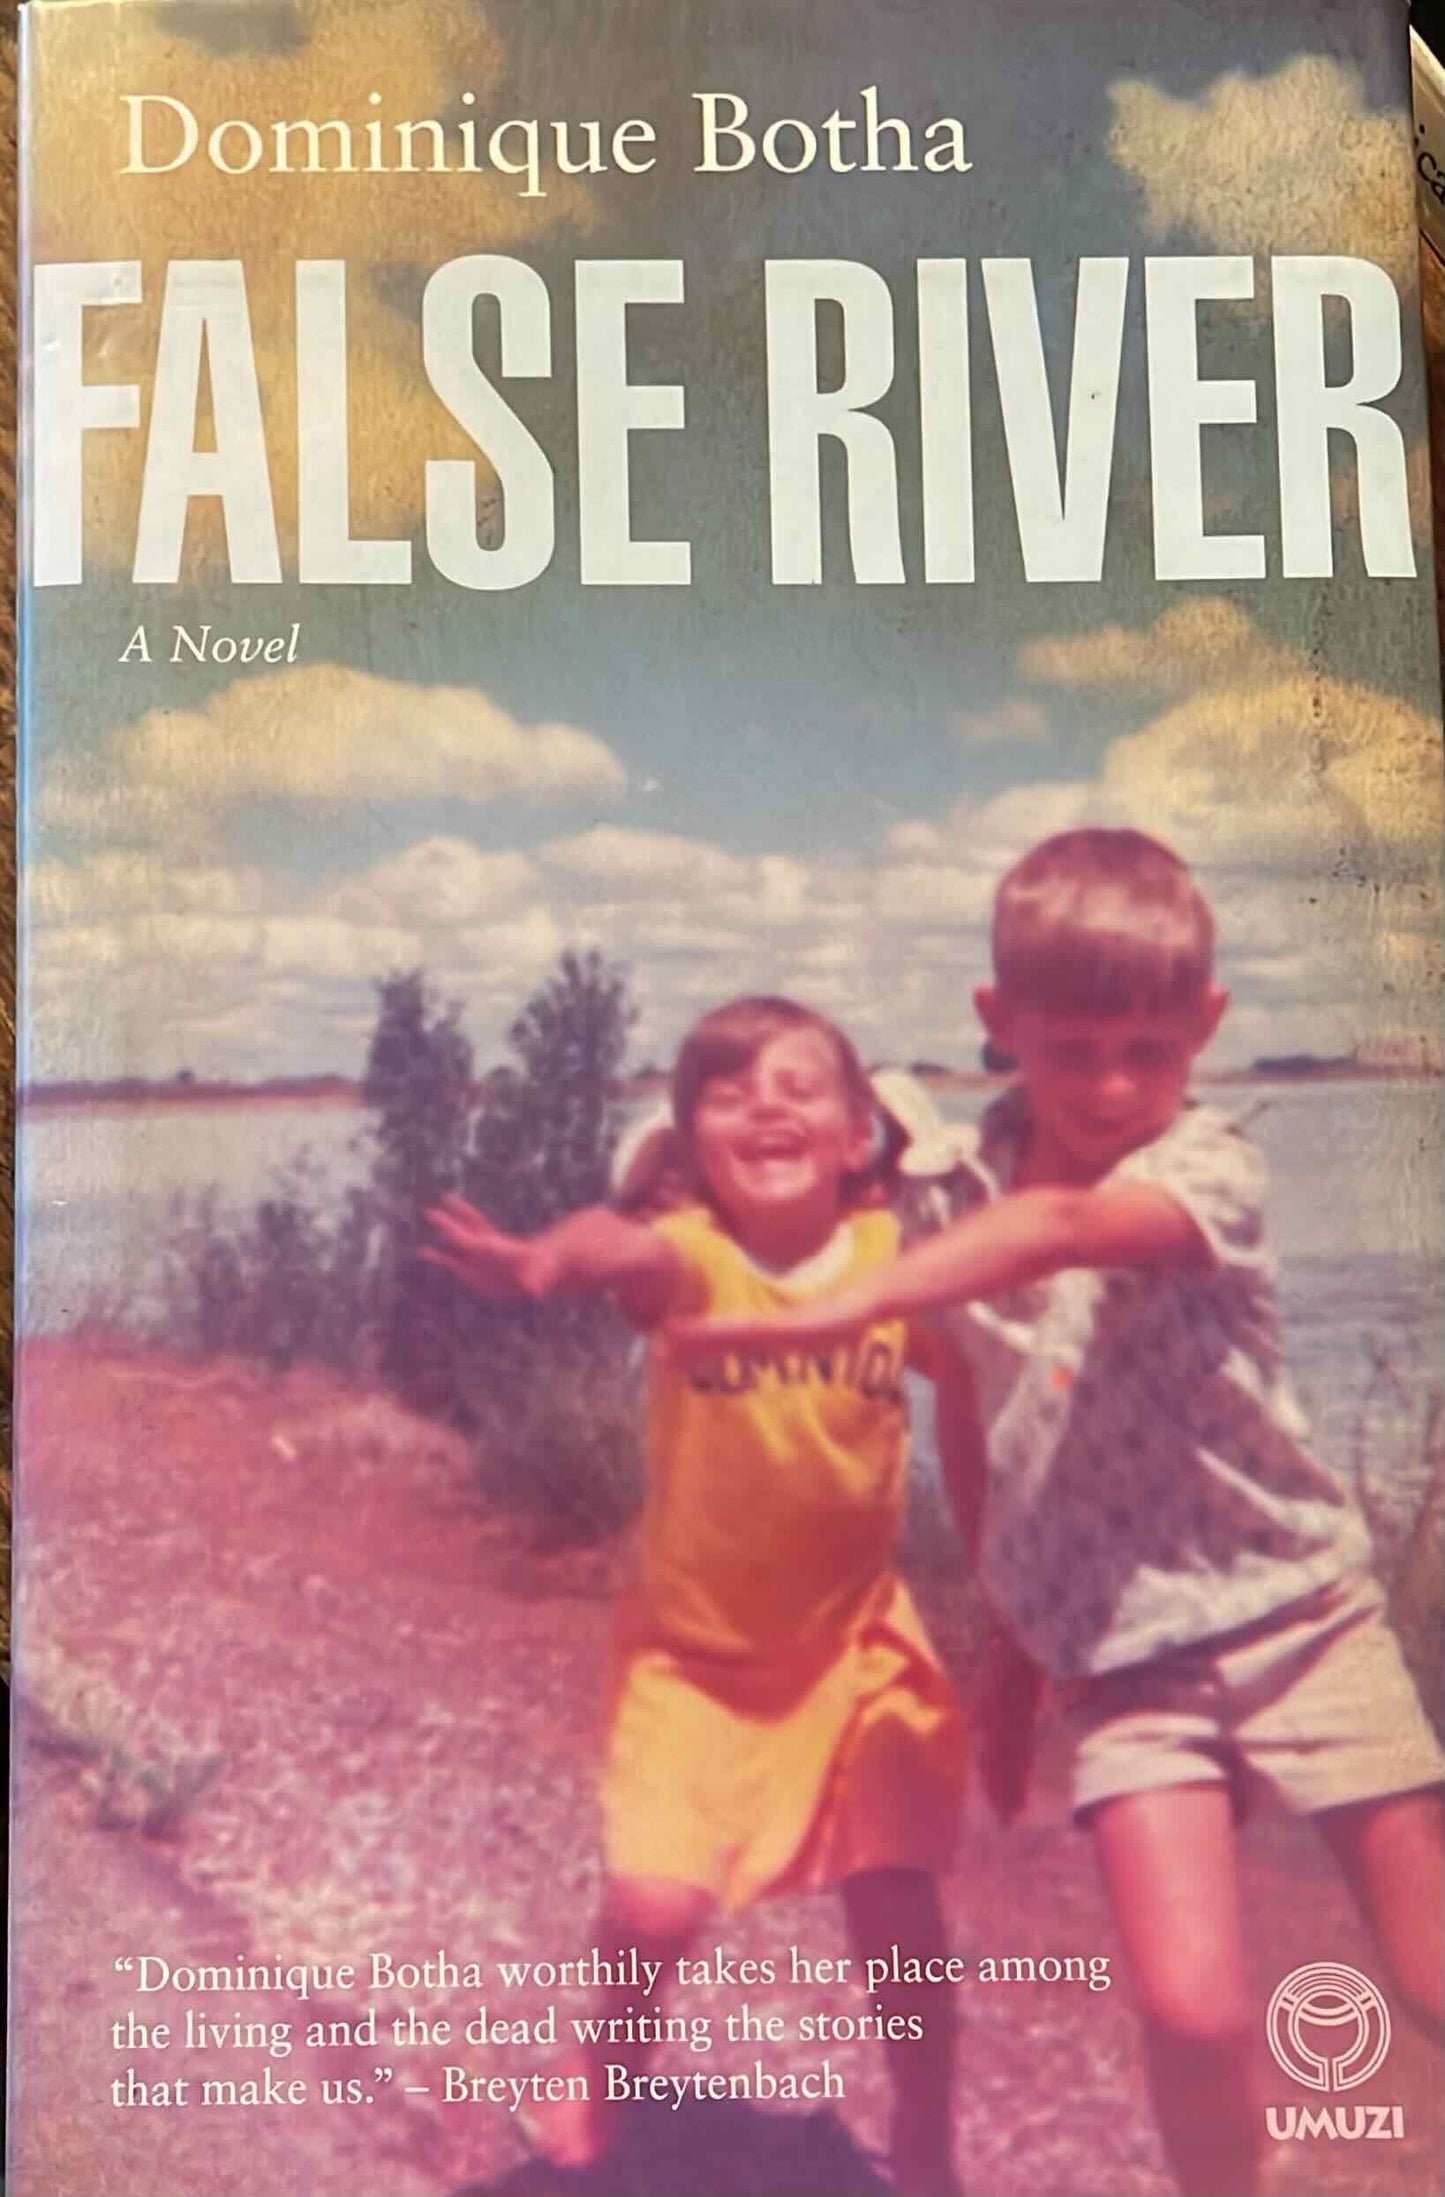 False River, by Dominique Botha (Used; Hardcover)